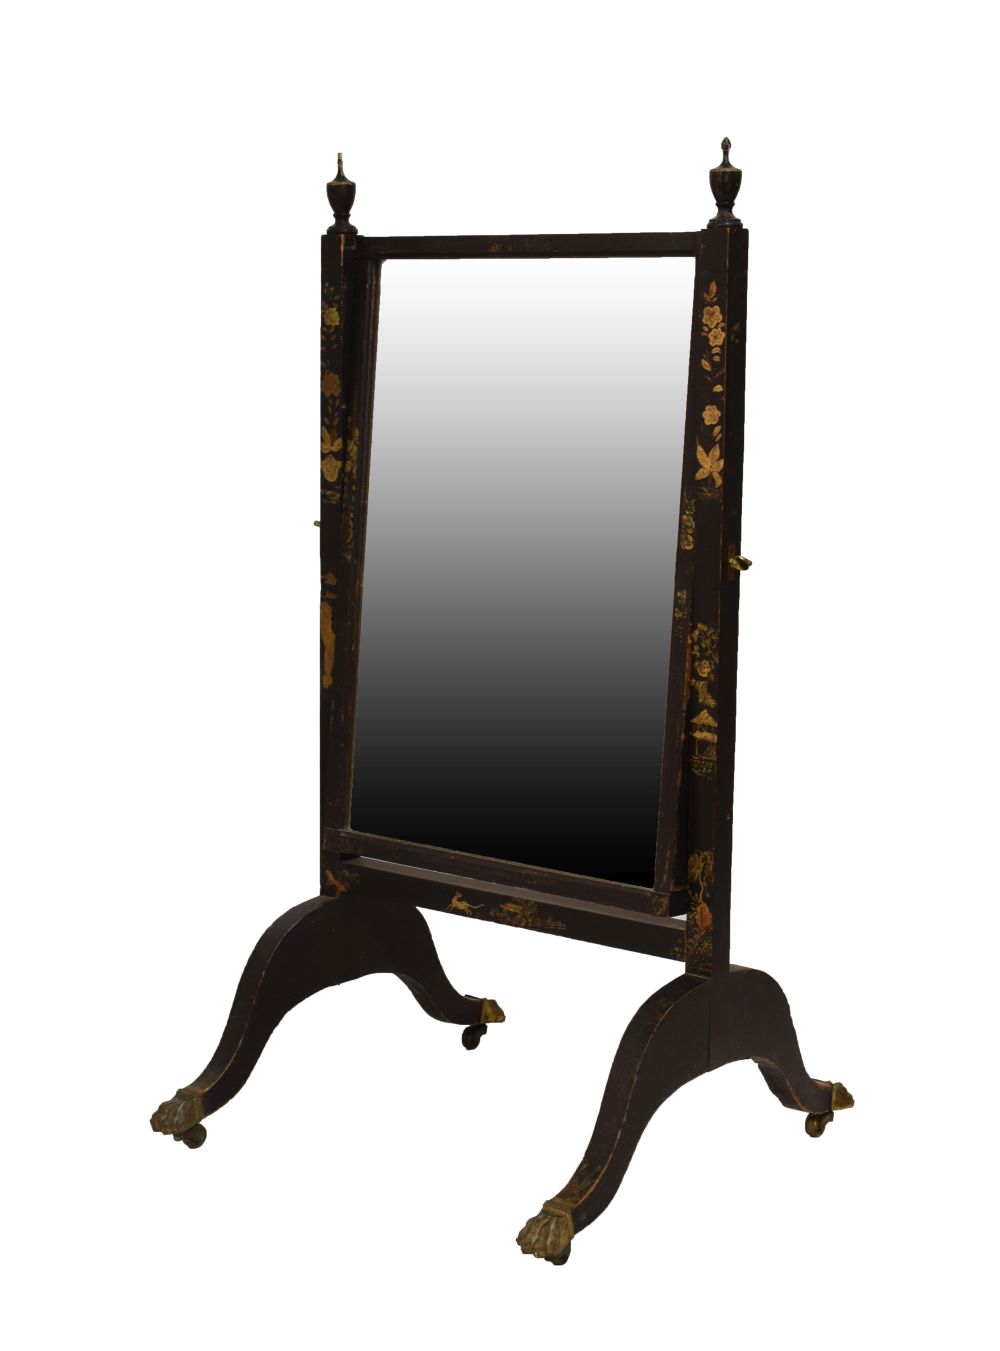 Regency black-lacquered chinoiserie cheval mirror, the plain rectangular plate within moulded